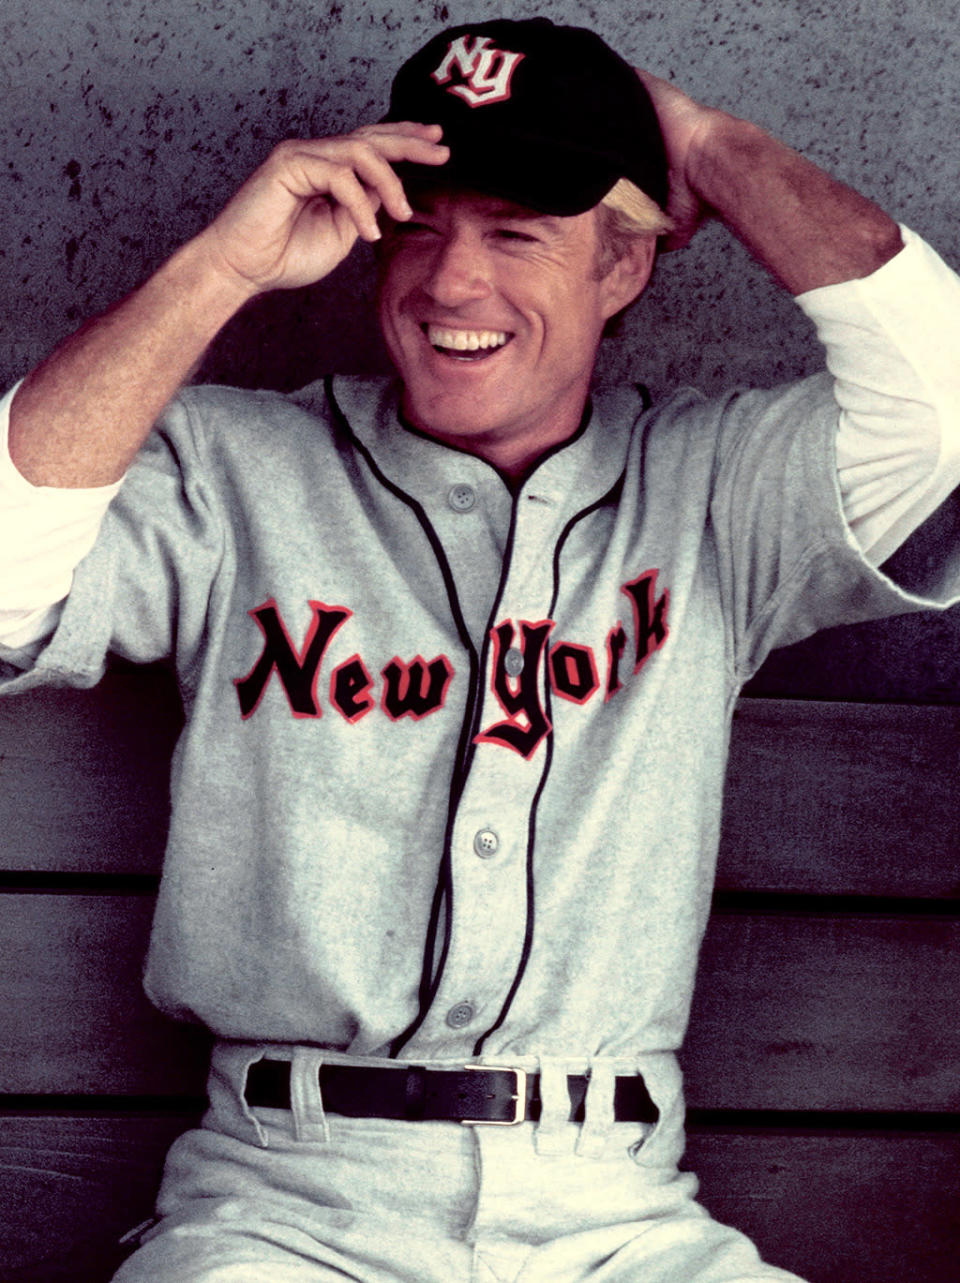 <p>A suit and tie, western duds, a baseball uniform — Redford was dashing in all of them! In 1984, he was already beginning to produce and direct successful movies, but Redford stuck to showing off his onscreen talents in <i>The Natural</i>. (Photo: Juergen Vollmer/Redferns/Getty Images)</p>